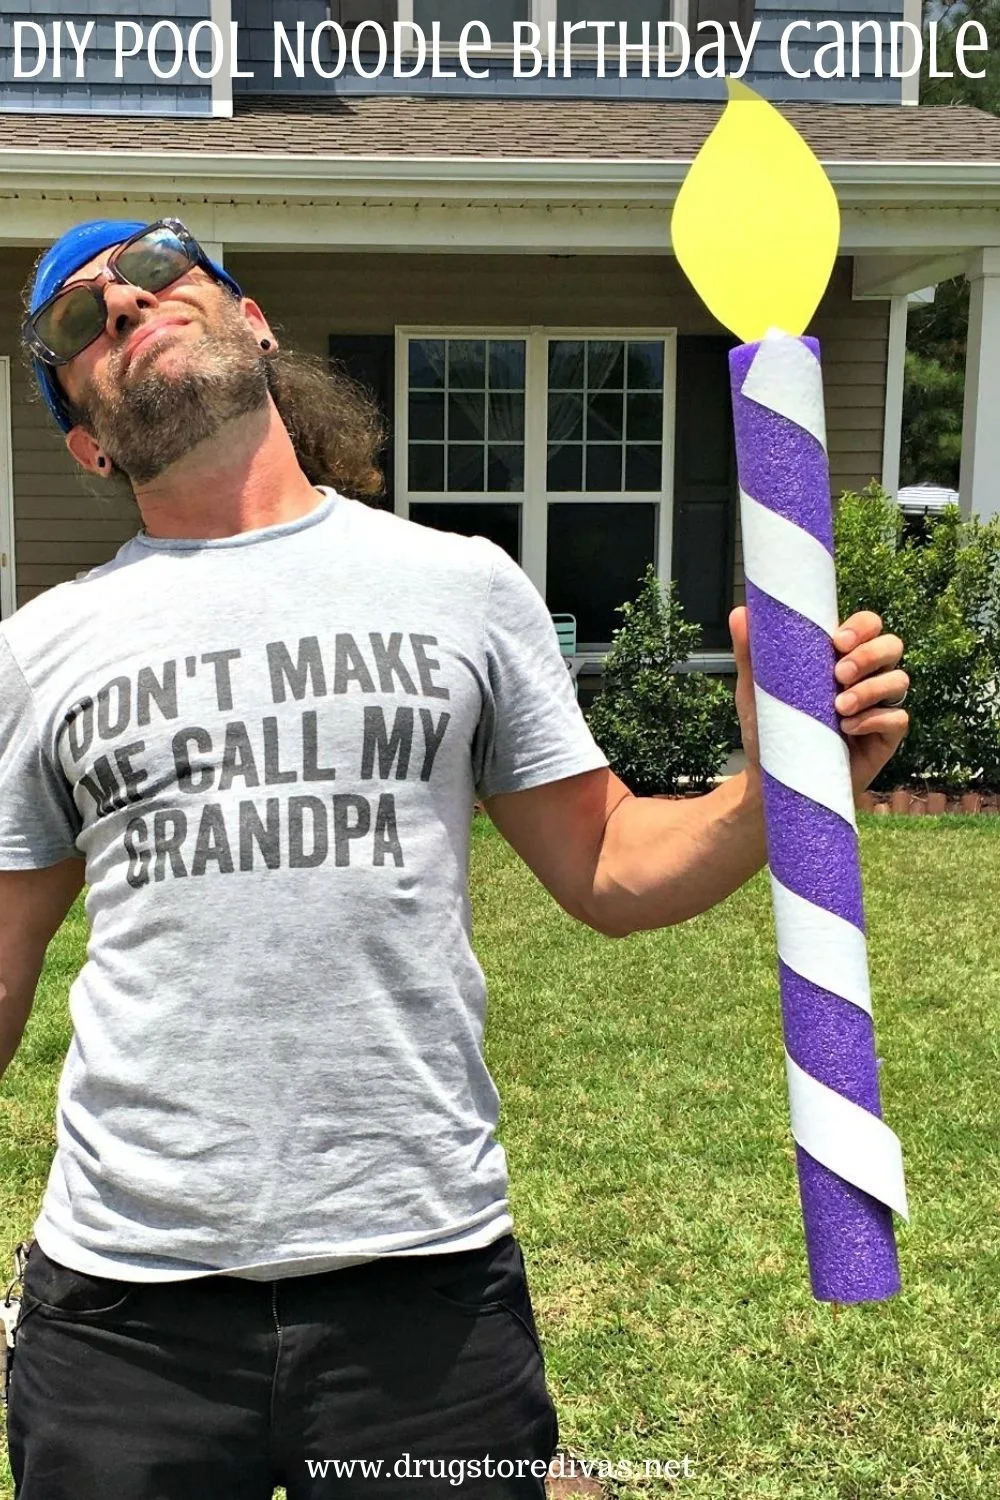 A man holding a homemade birthday candle with the words 